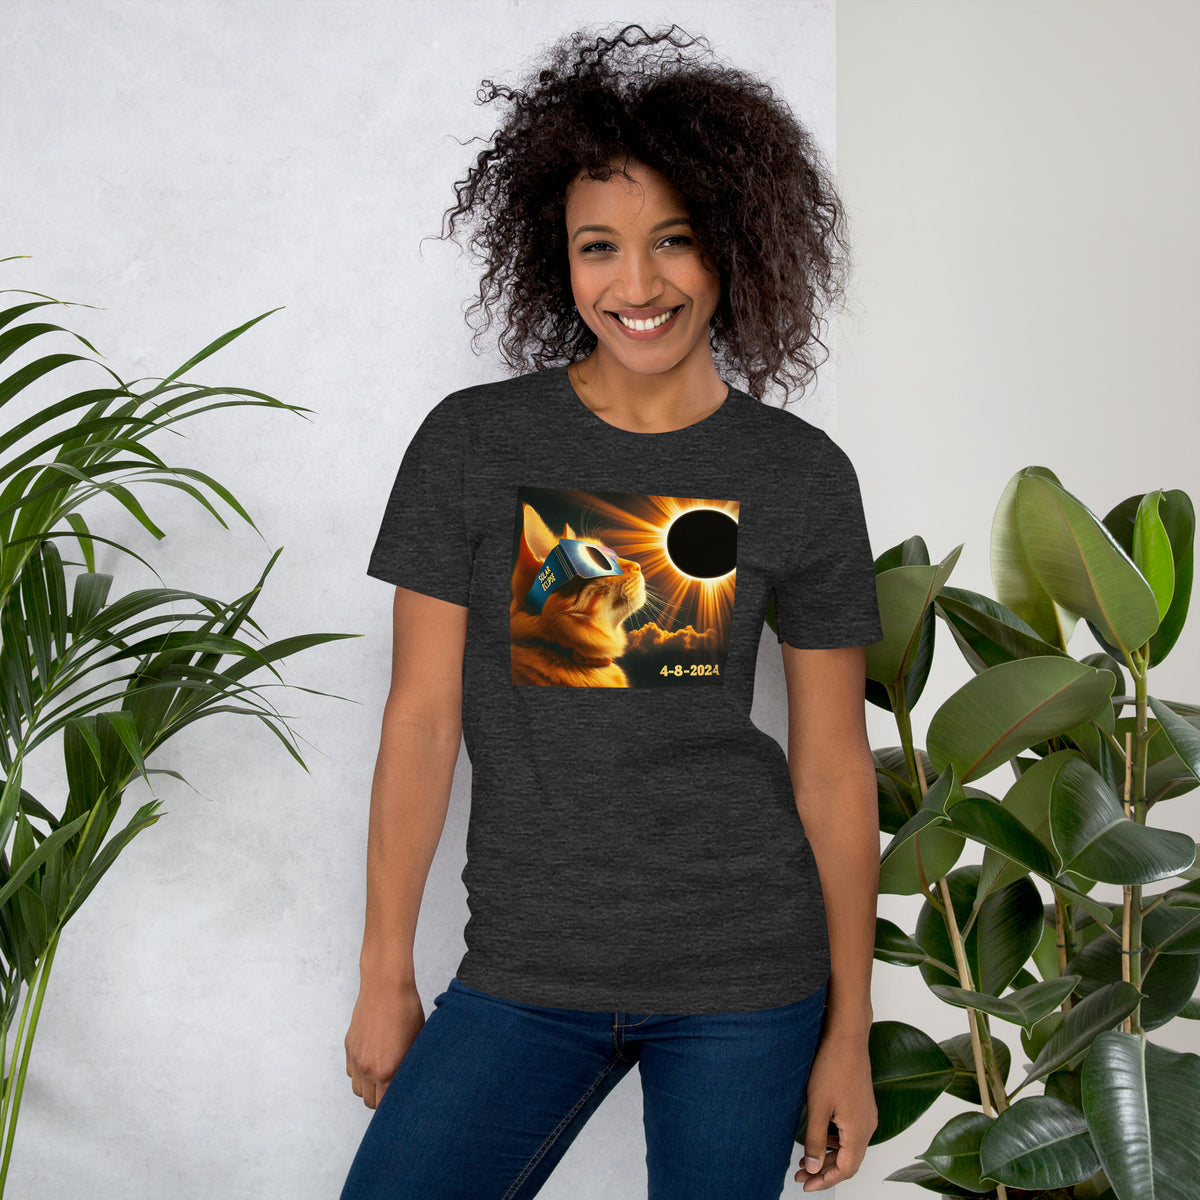 Funny Cat Eclipse Shirt- April 8, 2024 Solar Event, Path of Totality, Perfect Astronomy Gift for Cat Lovers, Spring Eclipse Memorabilia